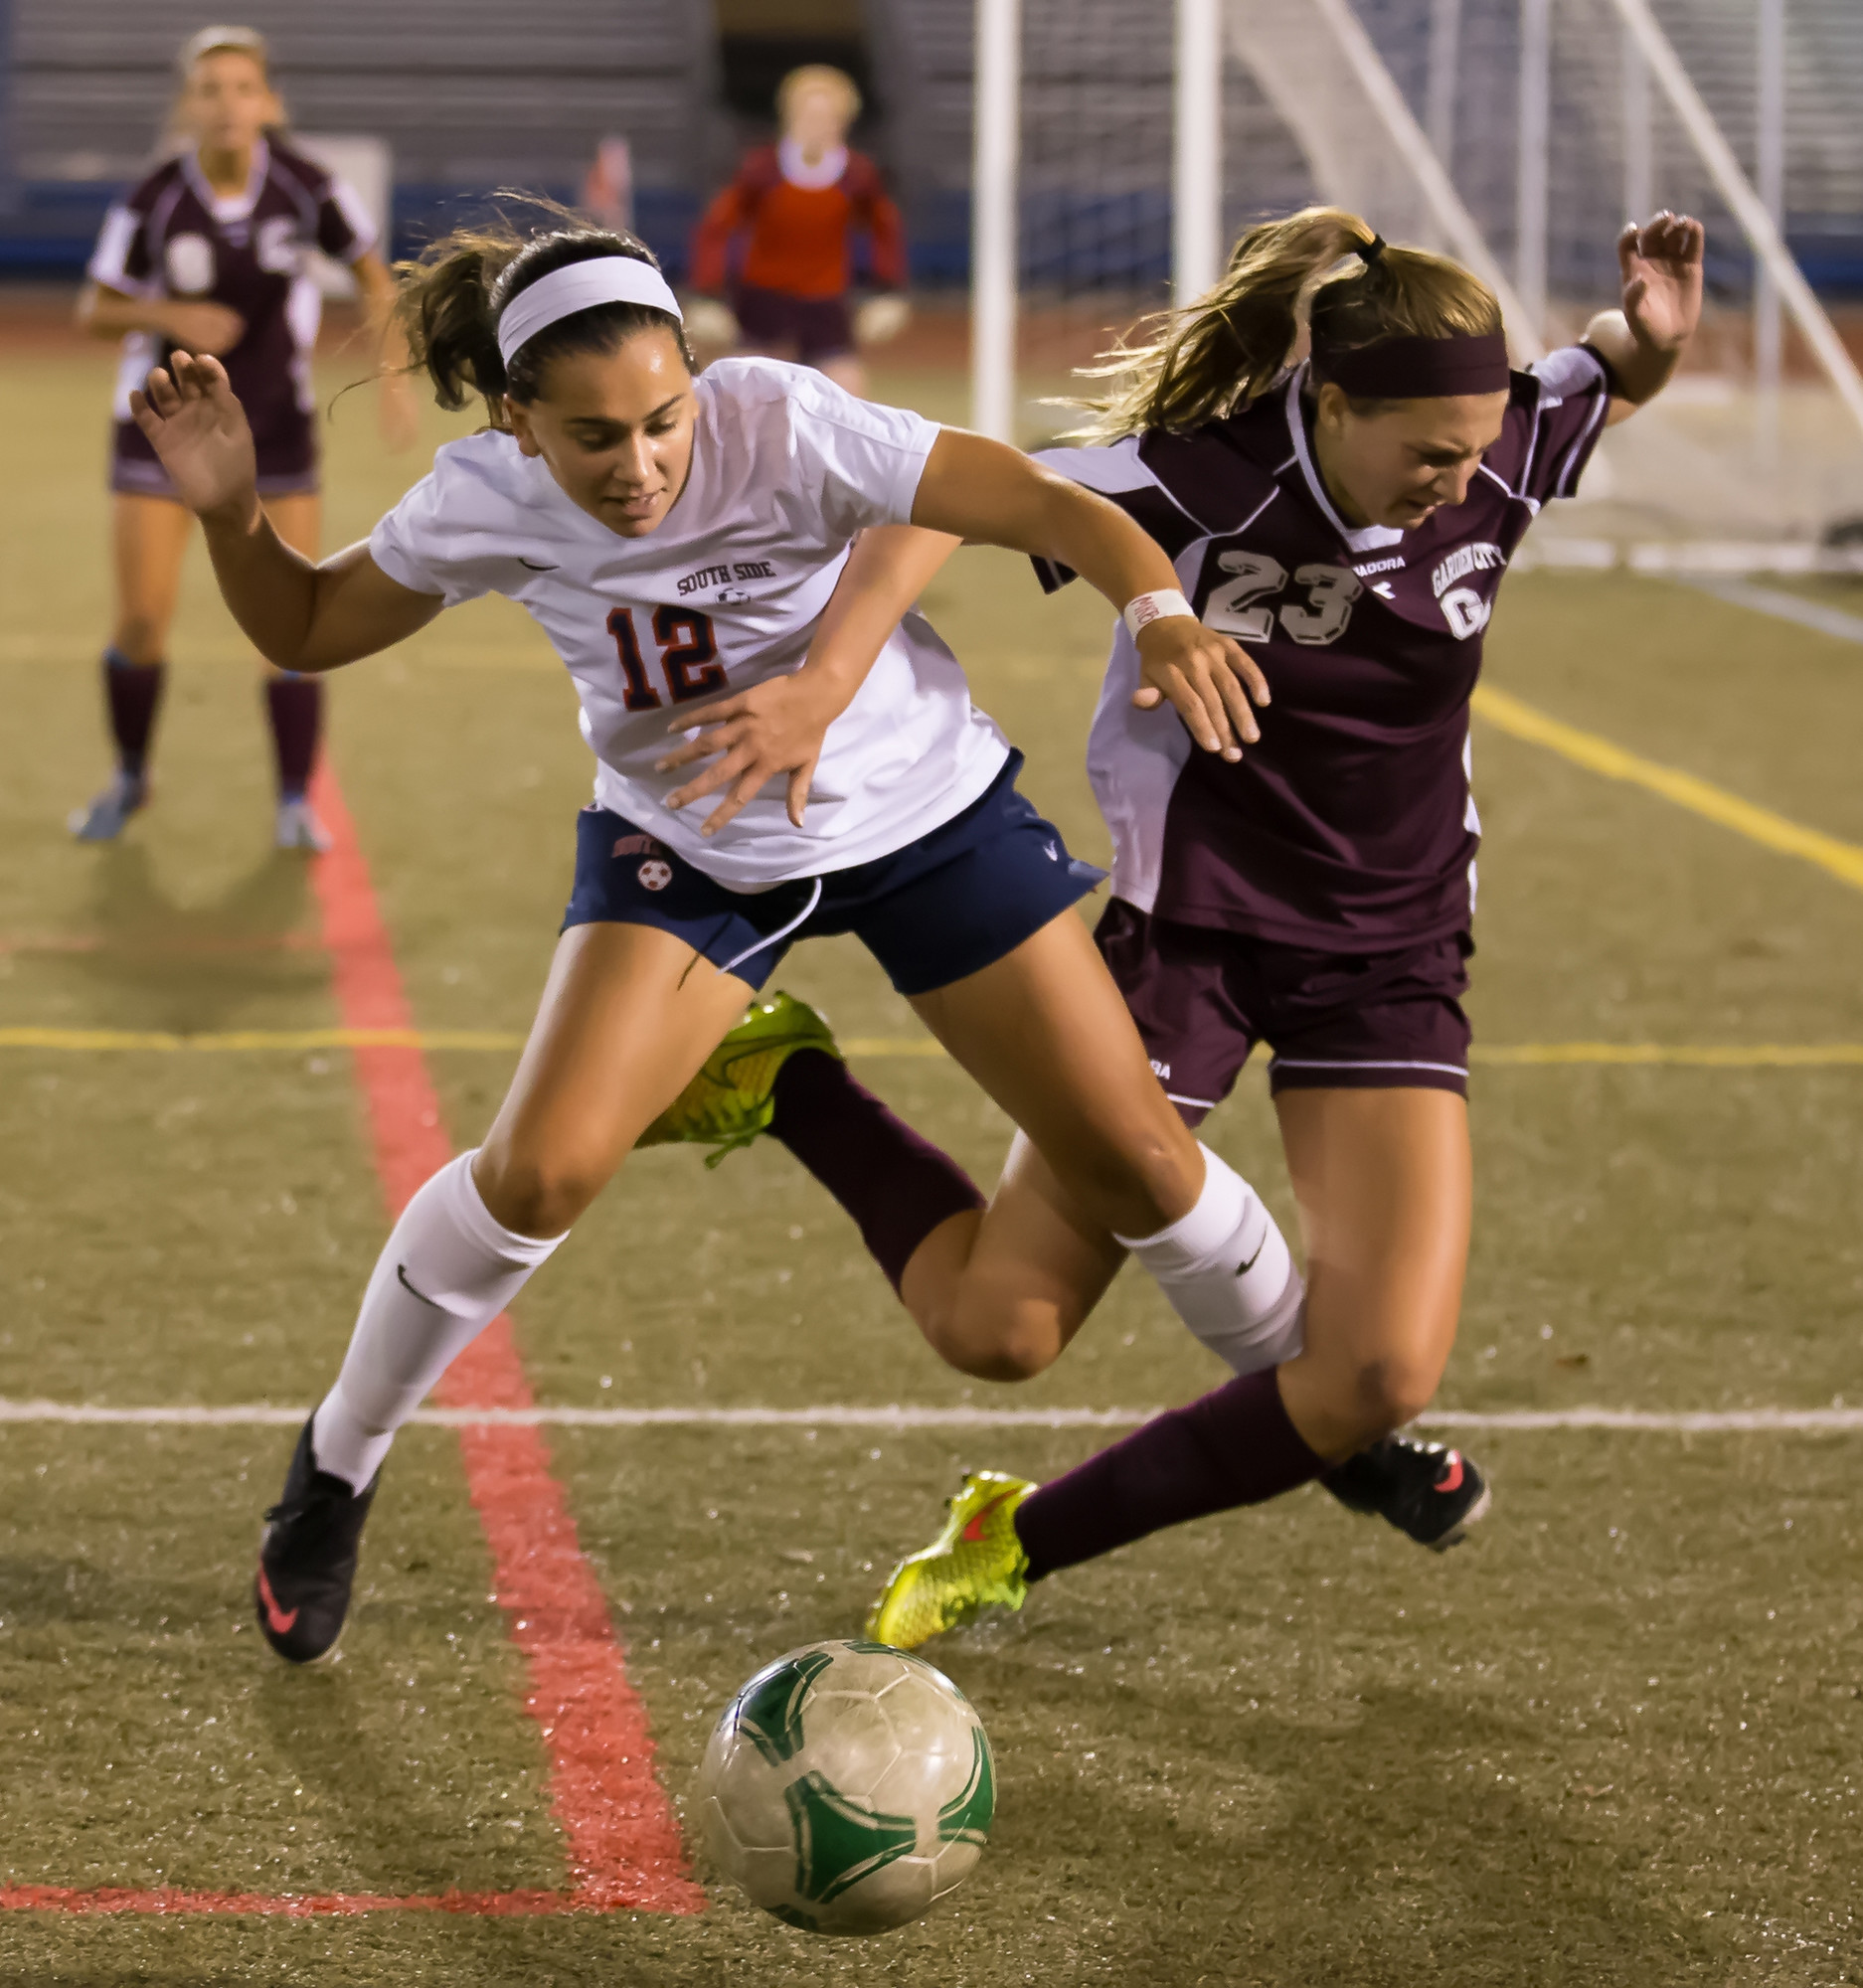 South Side’s Stephanie Leonardo, left, and Garden City’s Kelly Donovan tangled during the second half of the Nassau Class A championship game.